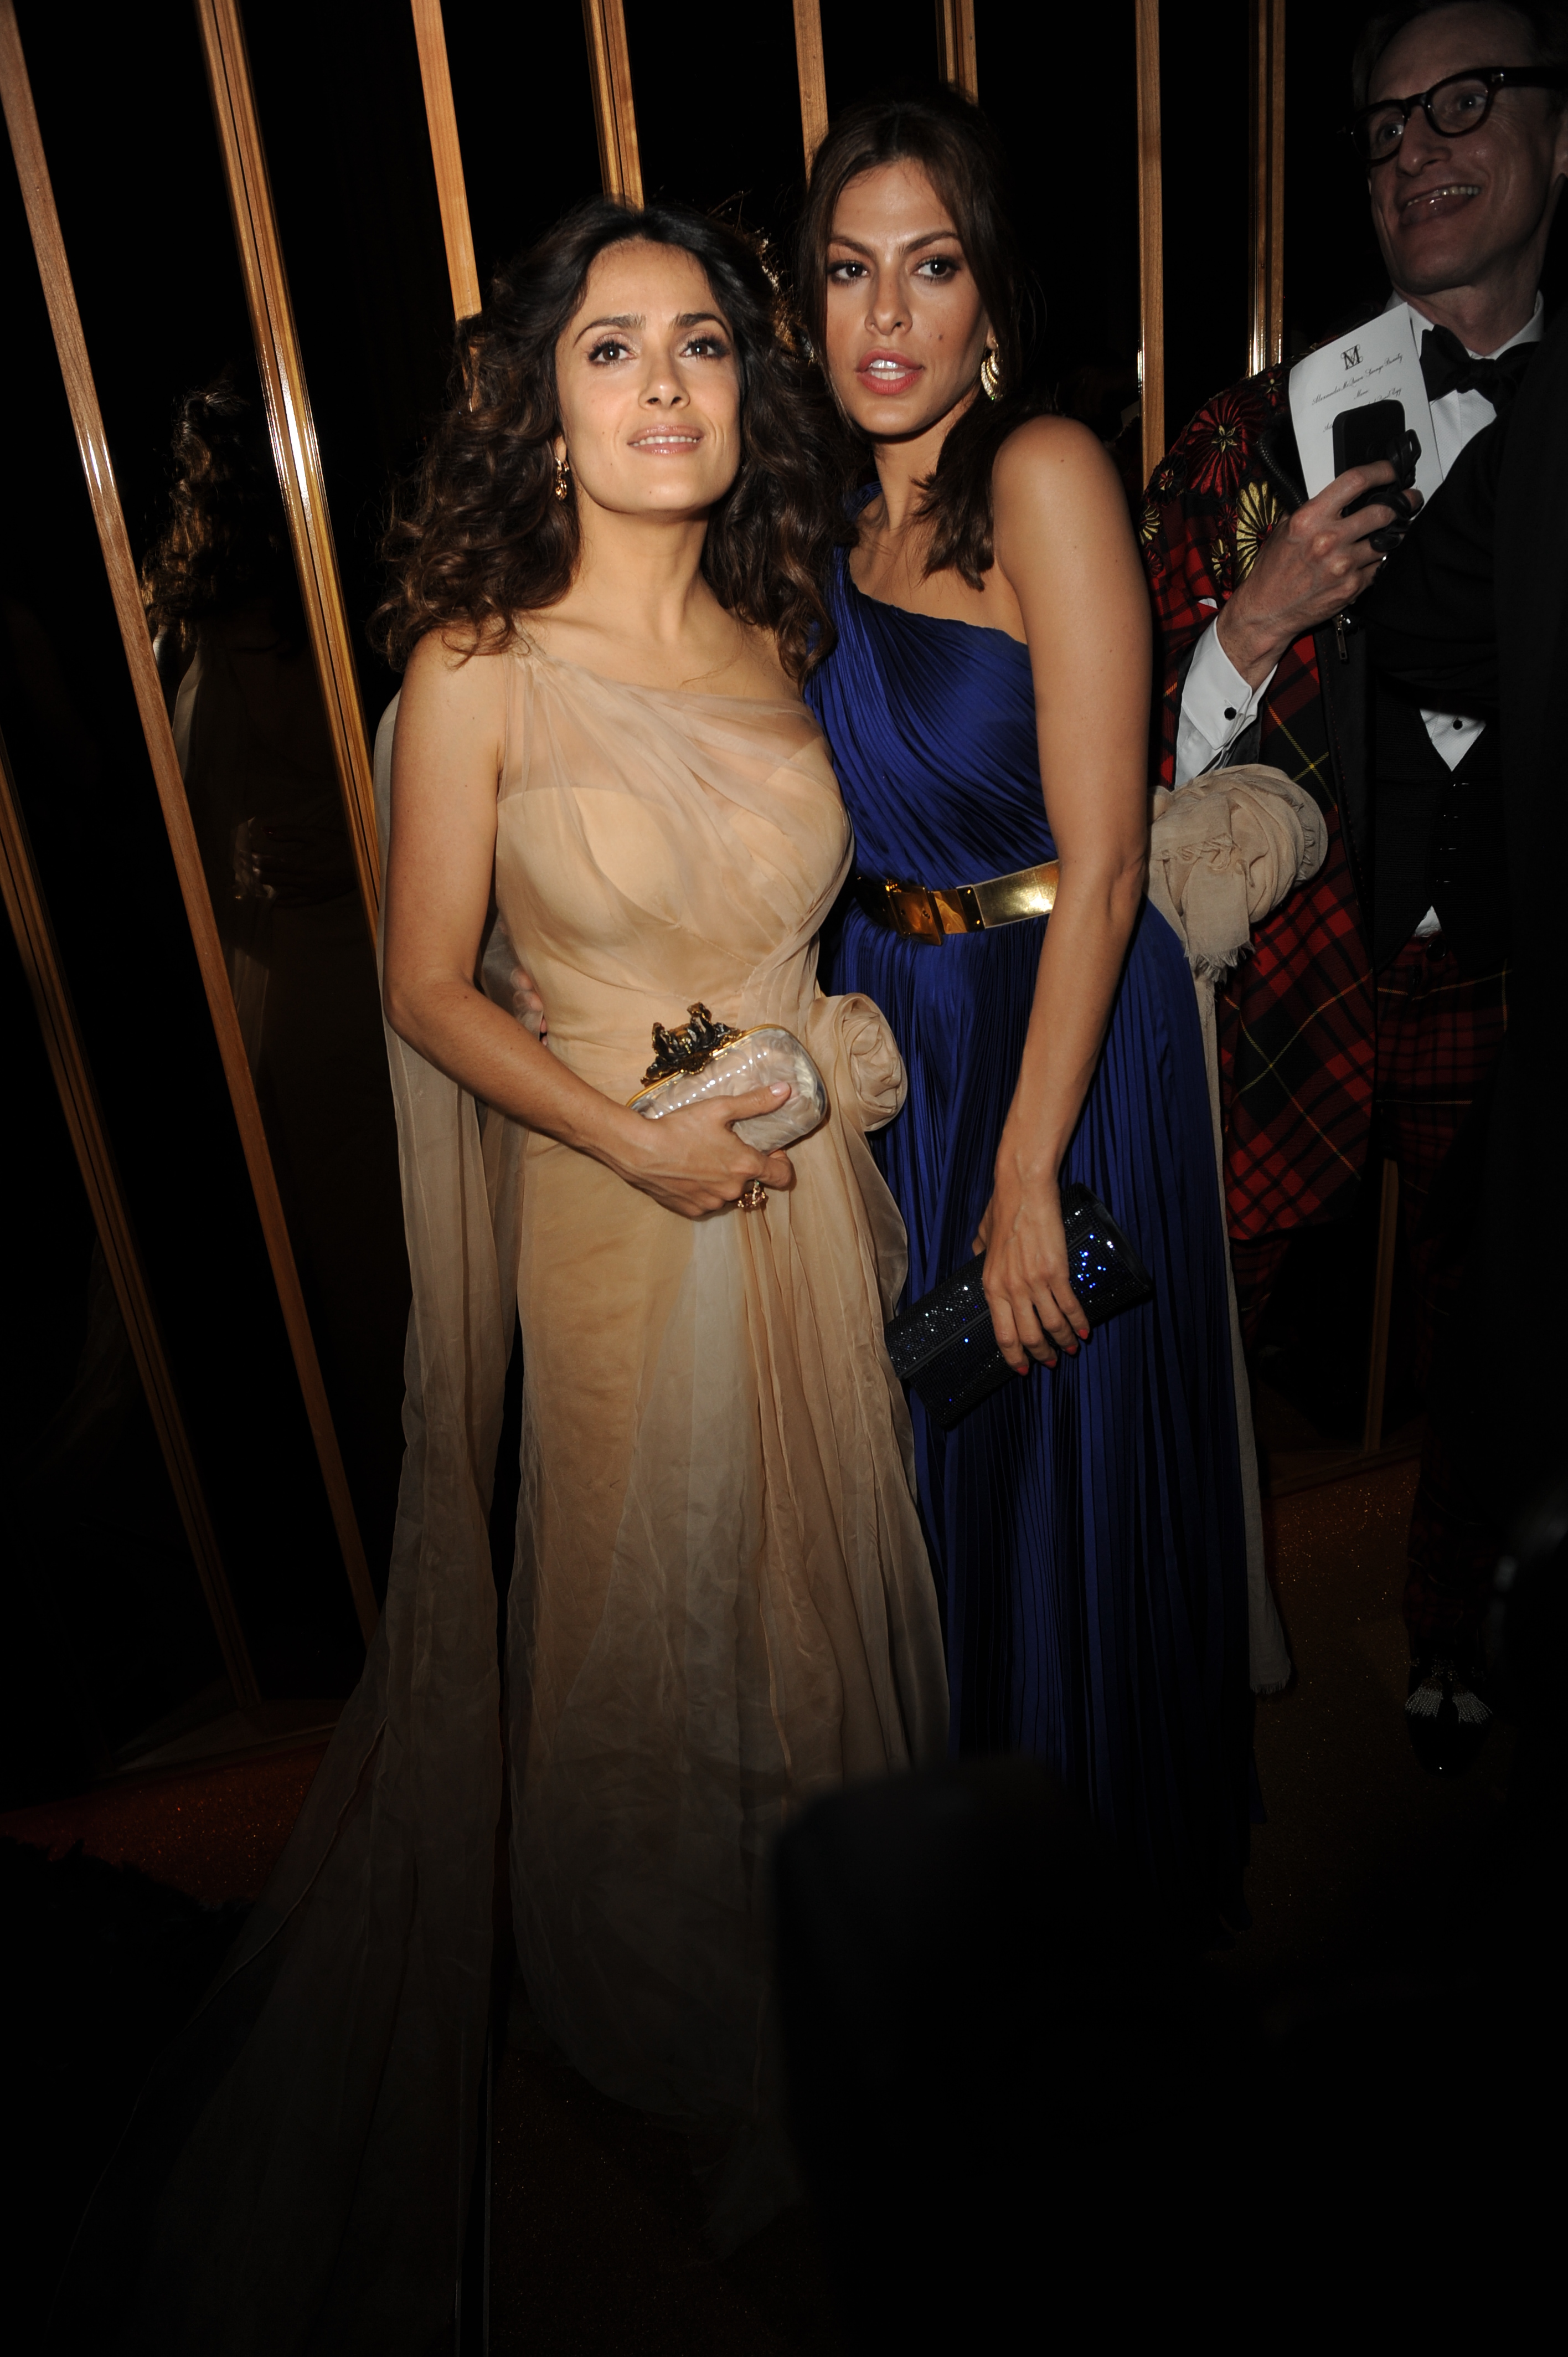 Salma pictured with Eva Mendes at the 2011 Met Gala